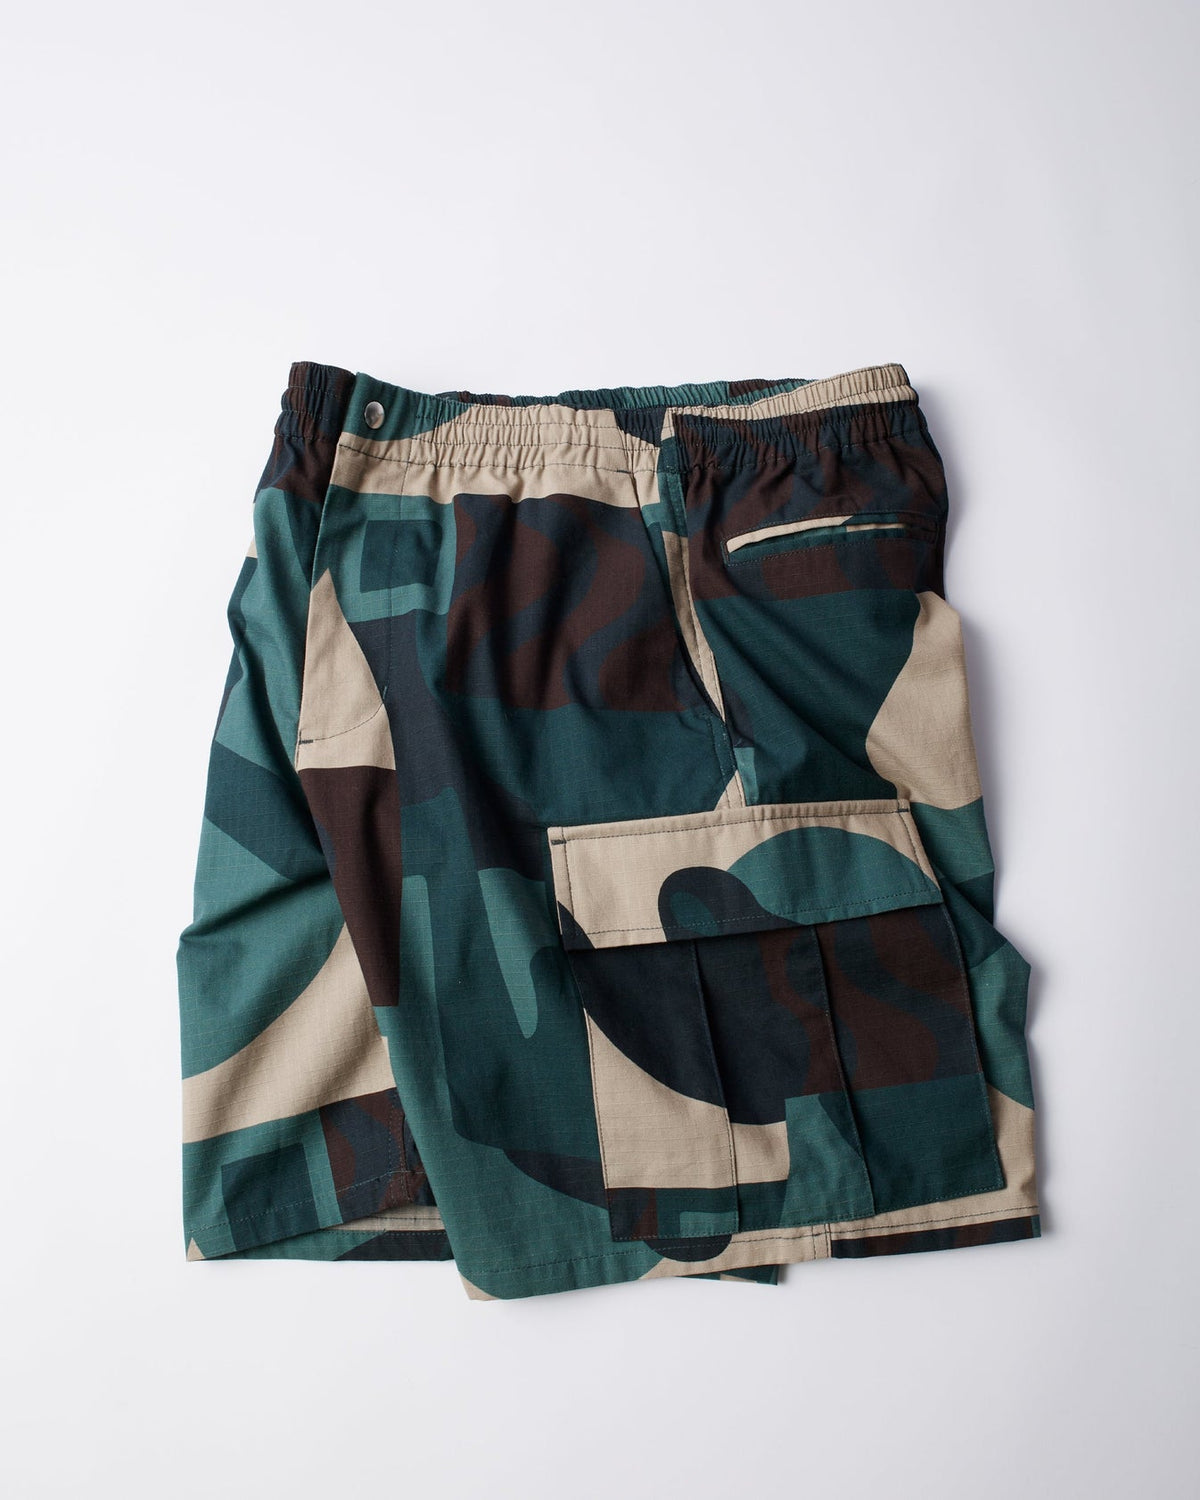 BY PARRA DISTORTED CAMO SHORTS